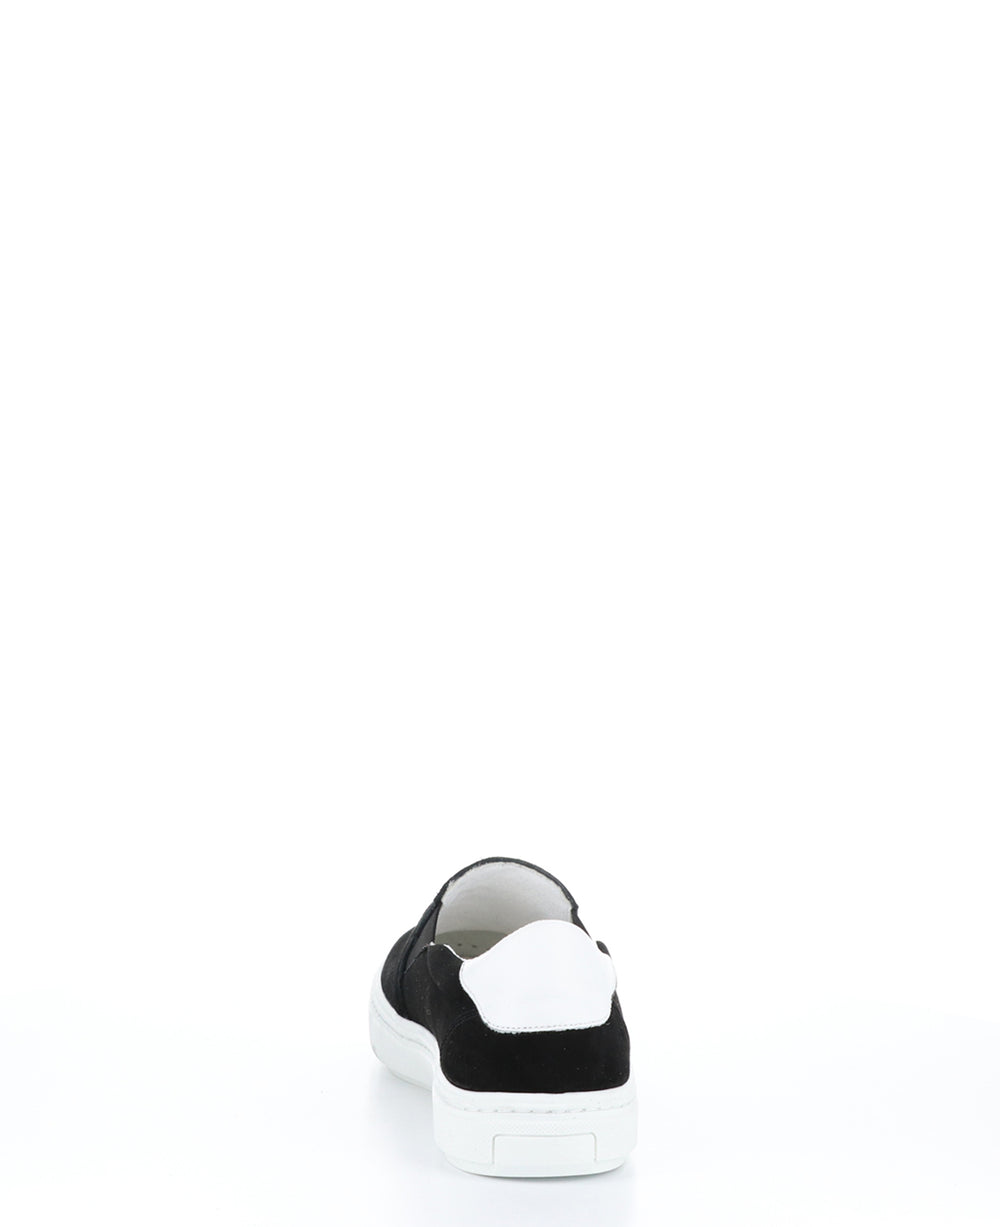 CYBILL BLACK Slip-on Shoes|CYBILL Chaussures à Enfiler in Noir|CYBILL Baskets à Enfiler in Noir